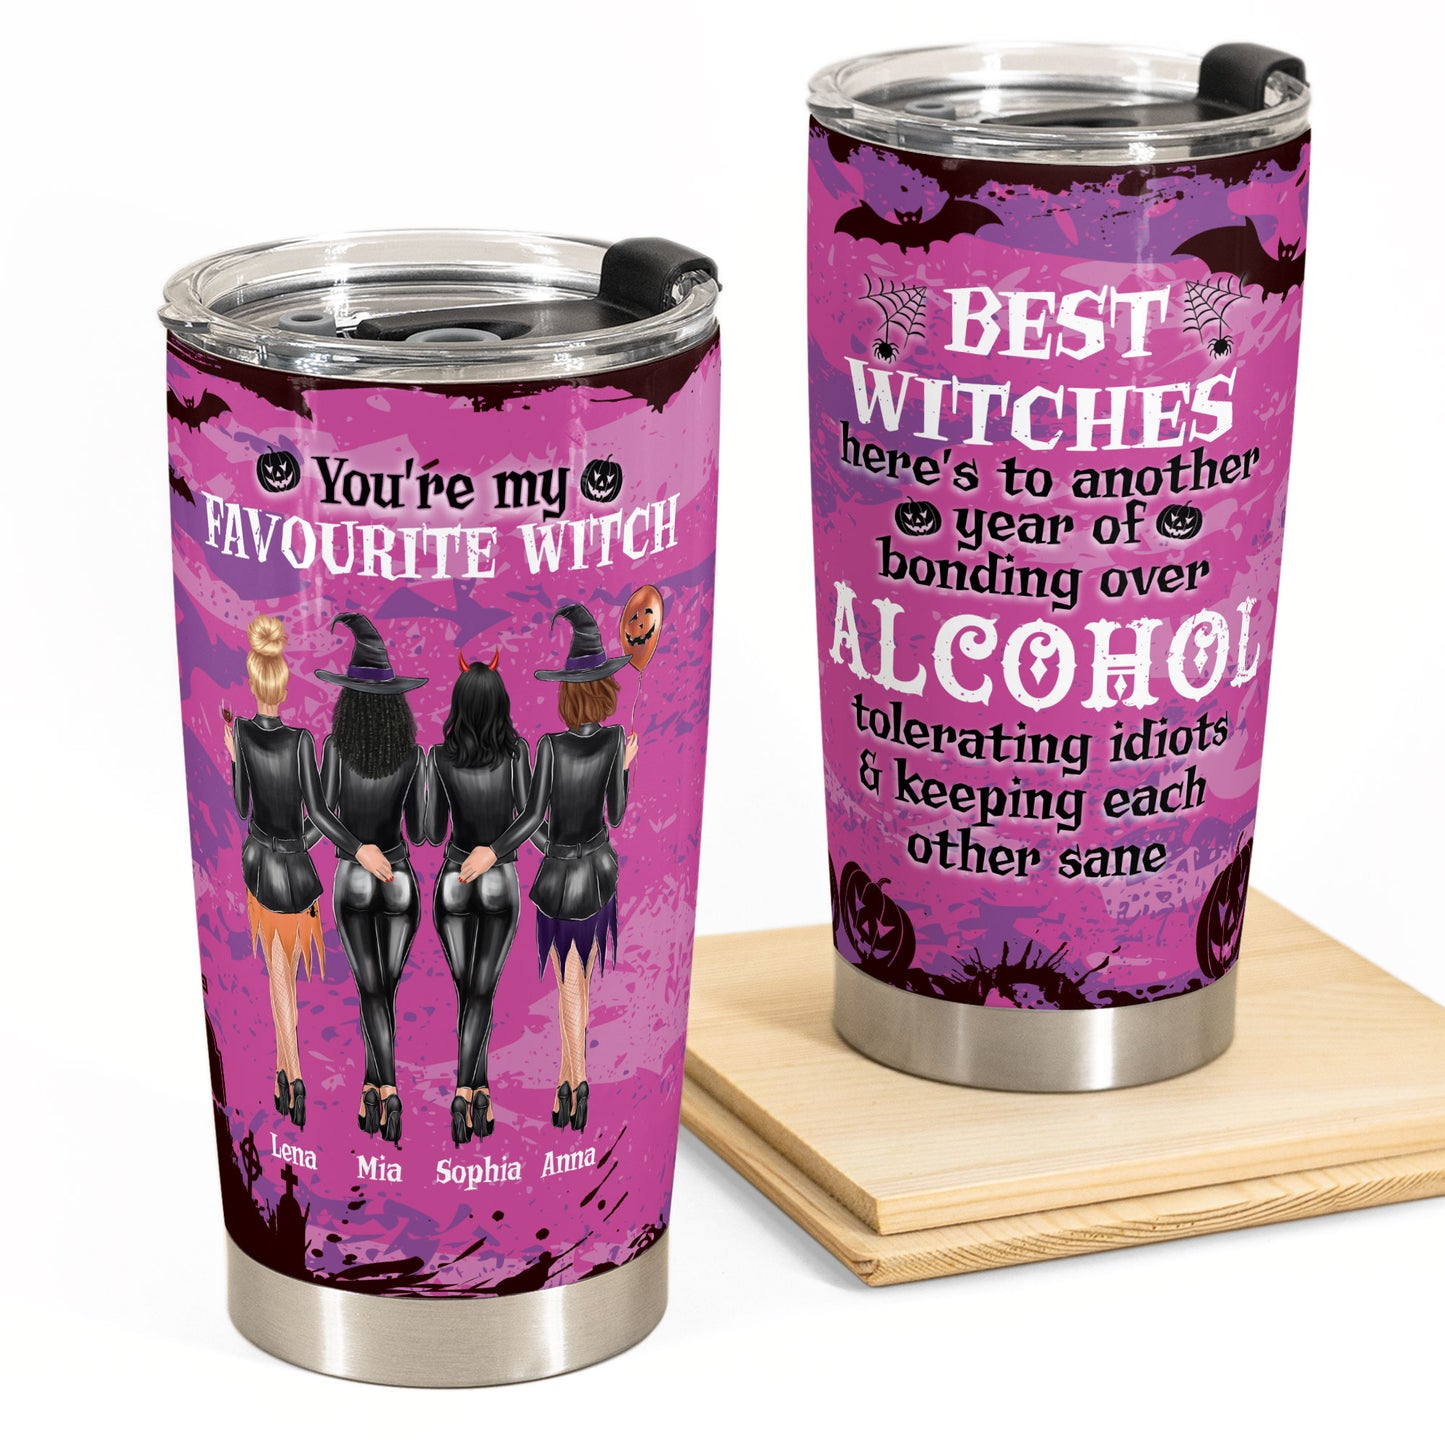 You're My Favourite Witch - Personalized Tumbler Cup - Birthday, Halloween Gift For Witches, Witch Craft - Grimoire